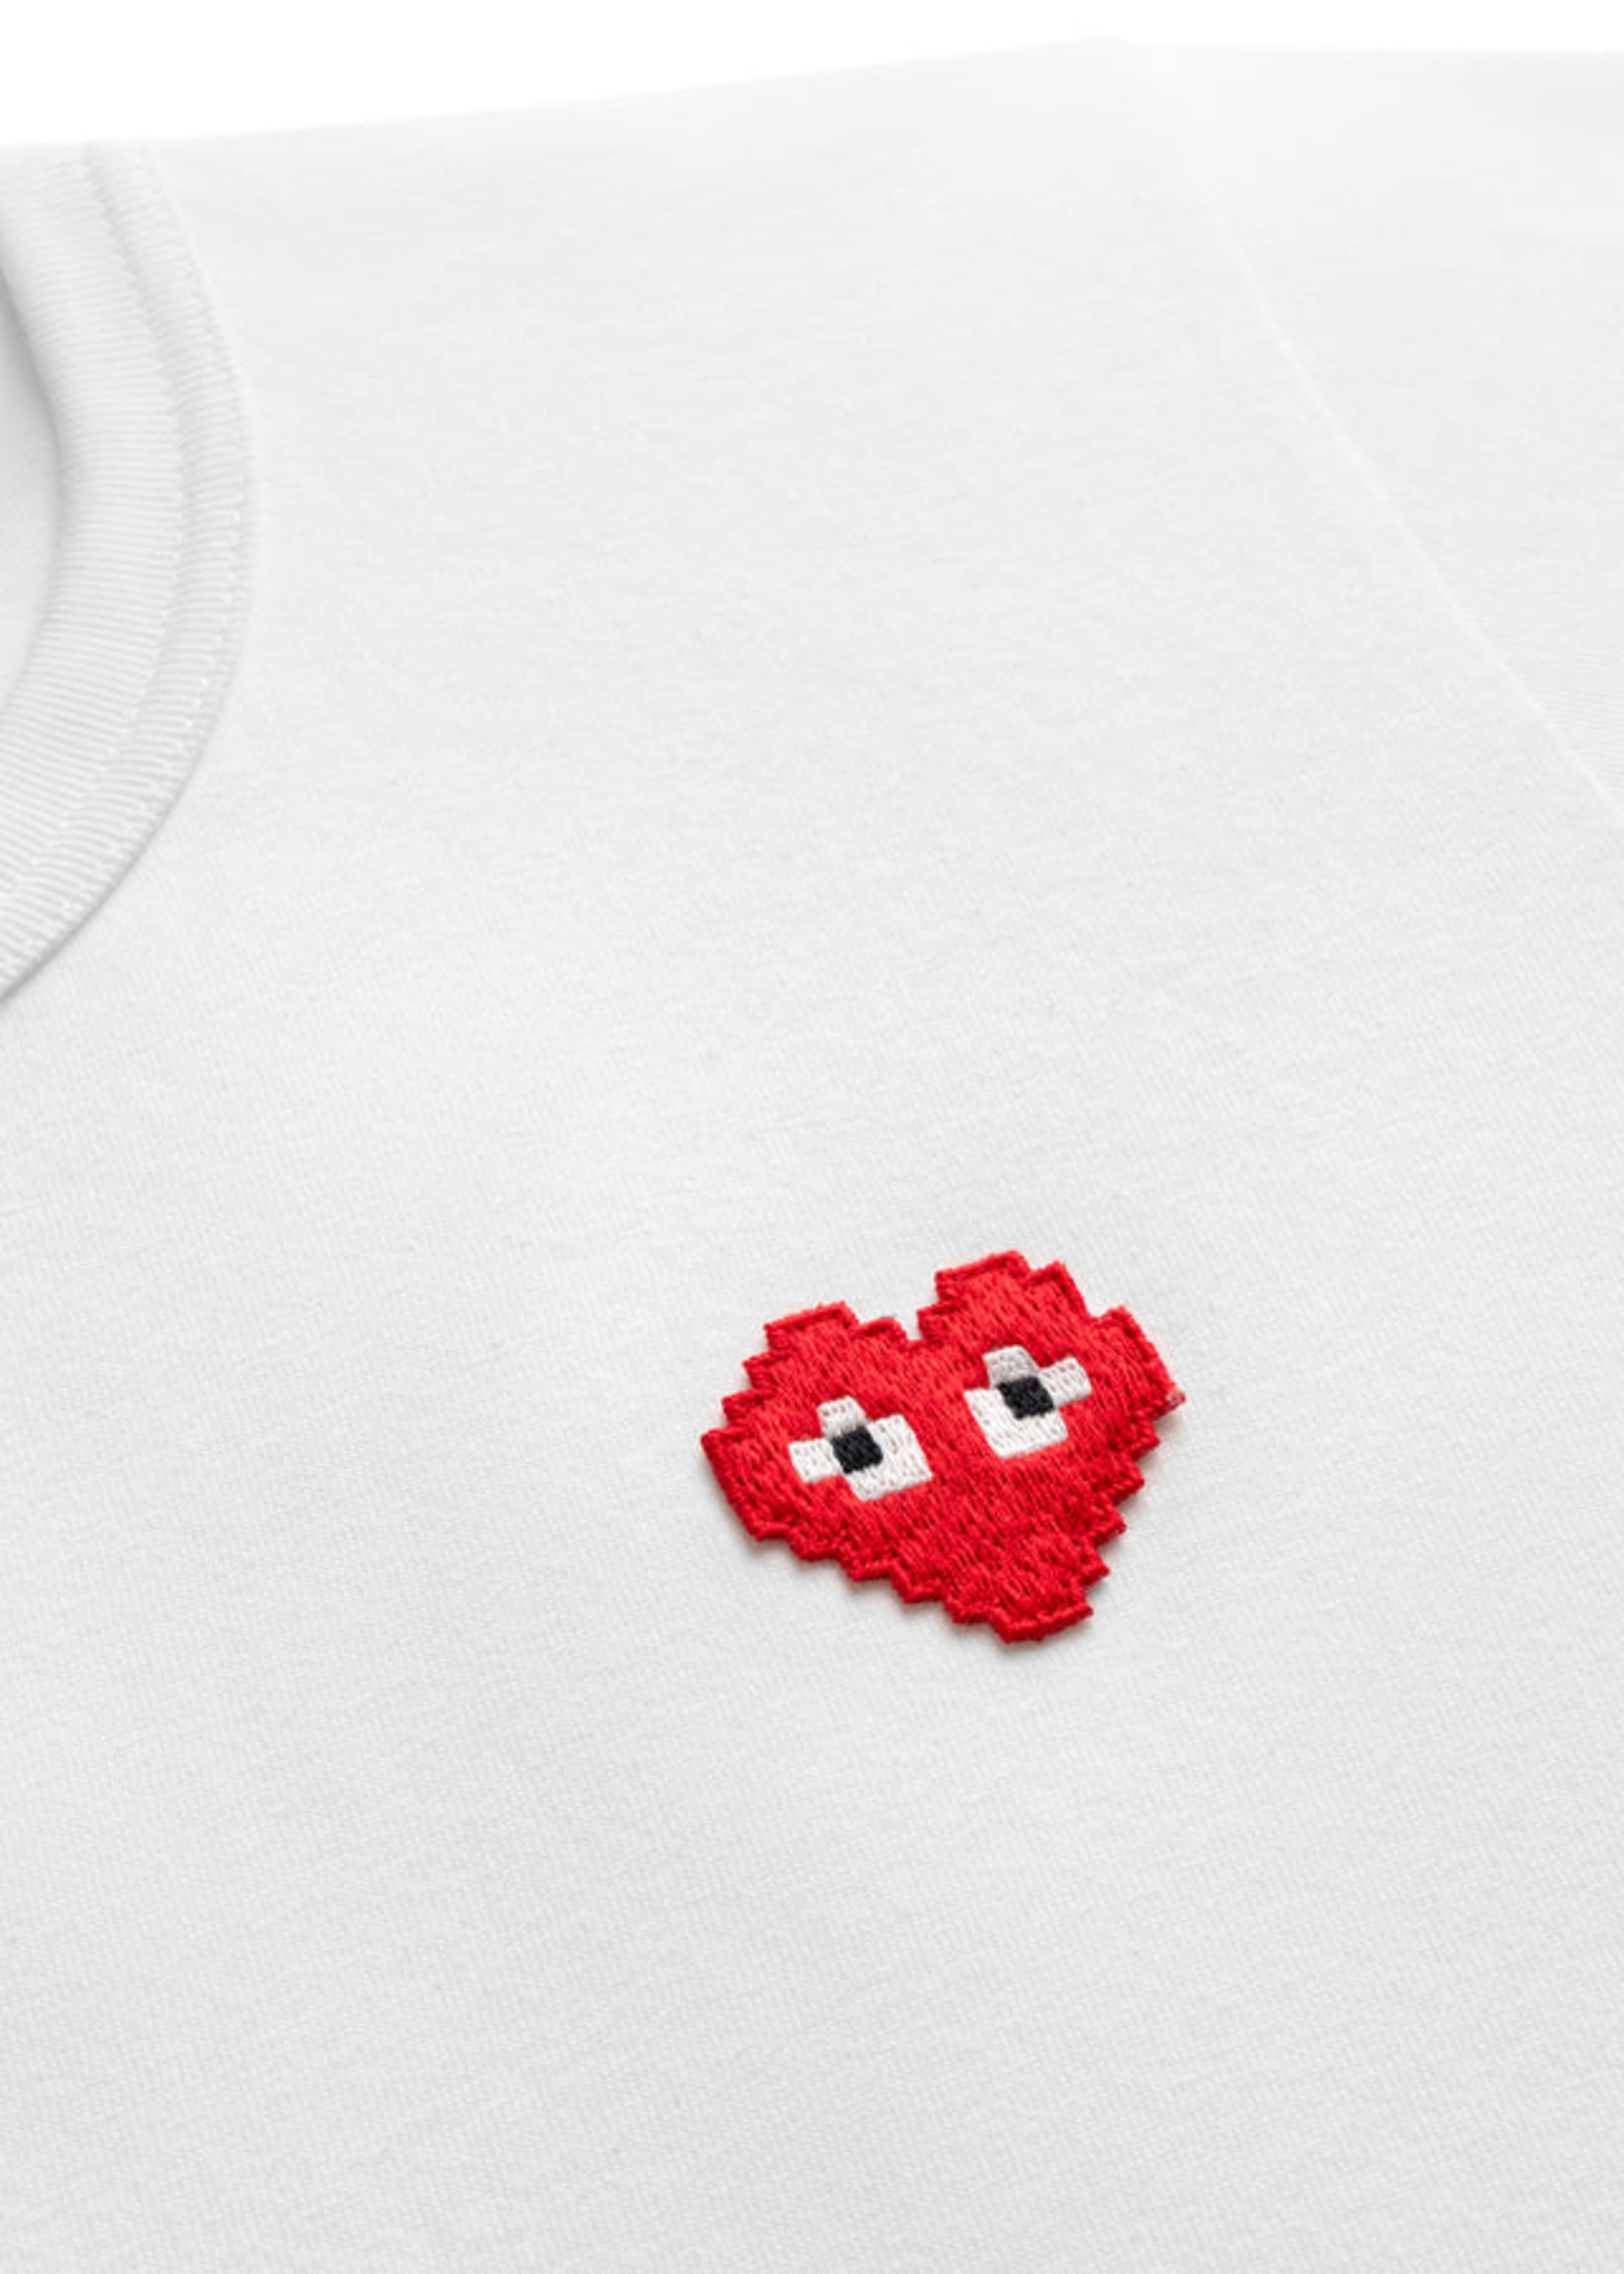 COMME des GARÇONS PLAY X THE ARTIST INVADER White T-shirt with Pixelated Heart